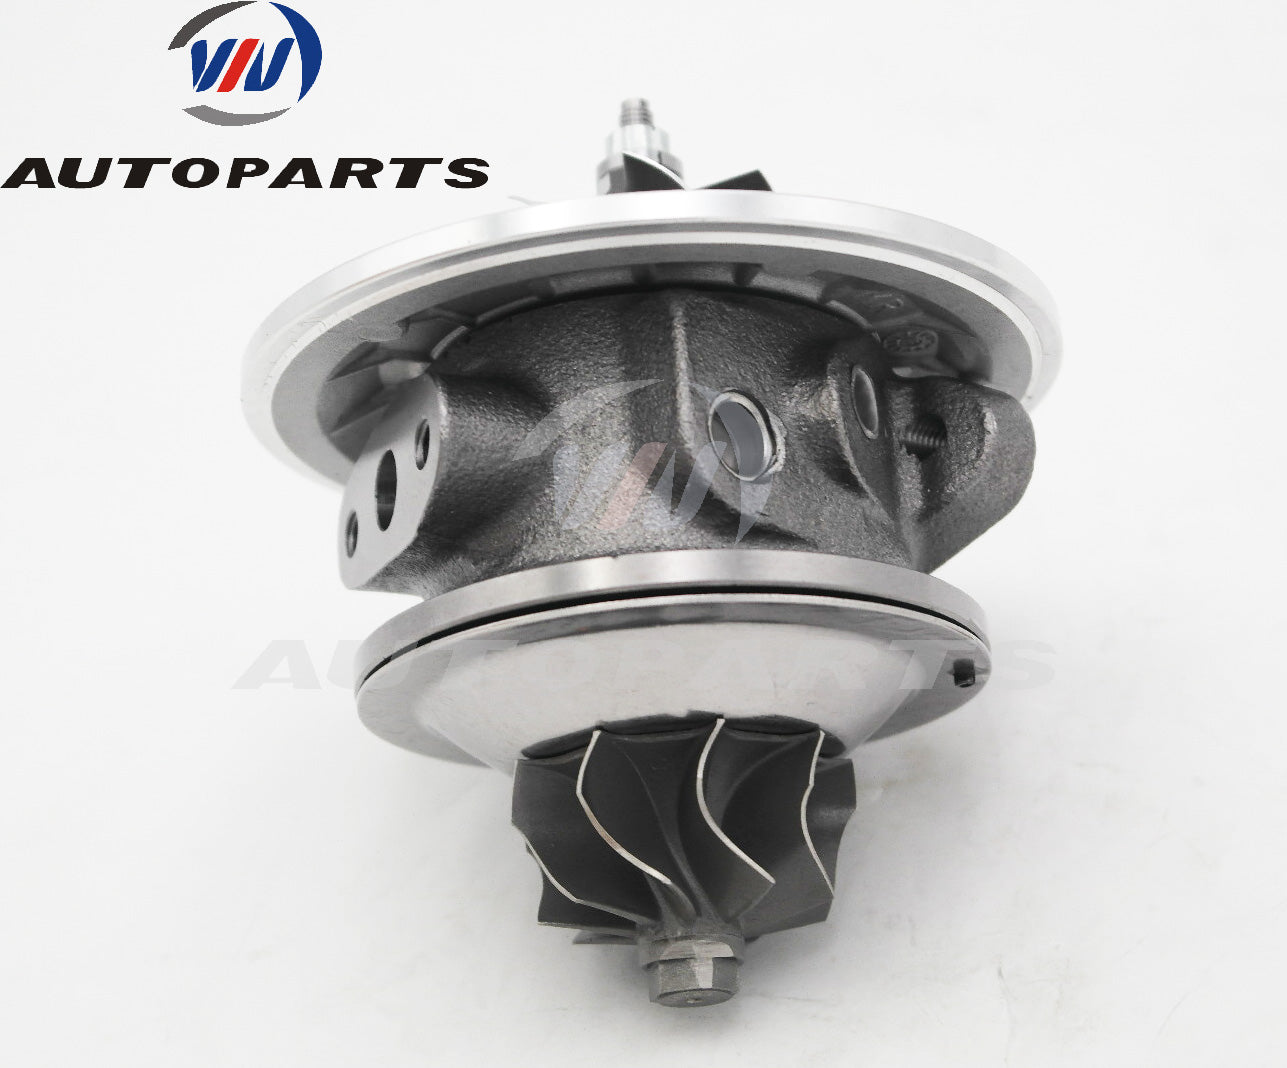 CHRA 479054-0002 for Turbocharger 701196-0001 for Nissan Safari, Patrol with 2.8L Diesel Engine